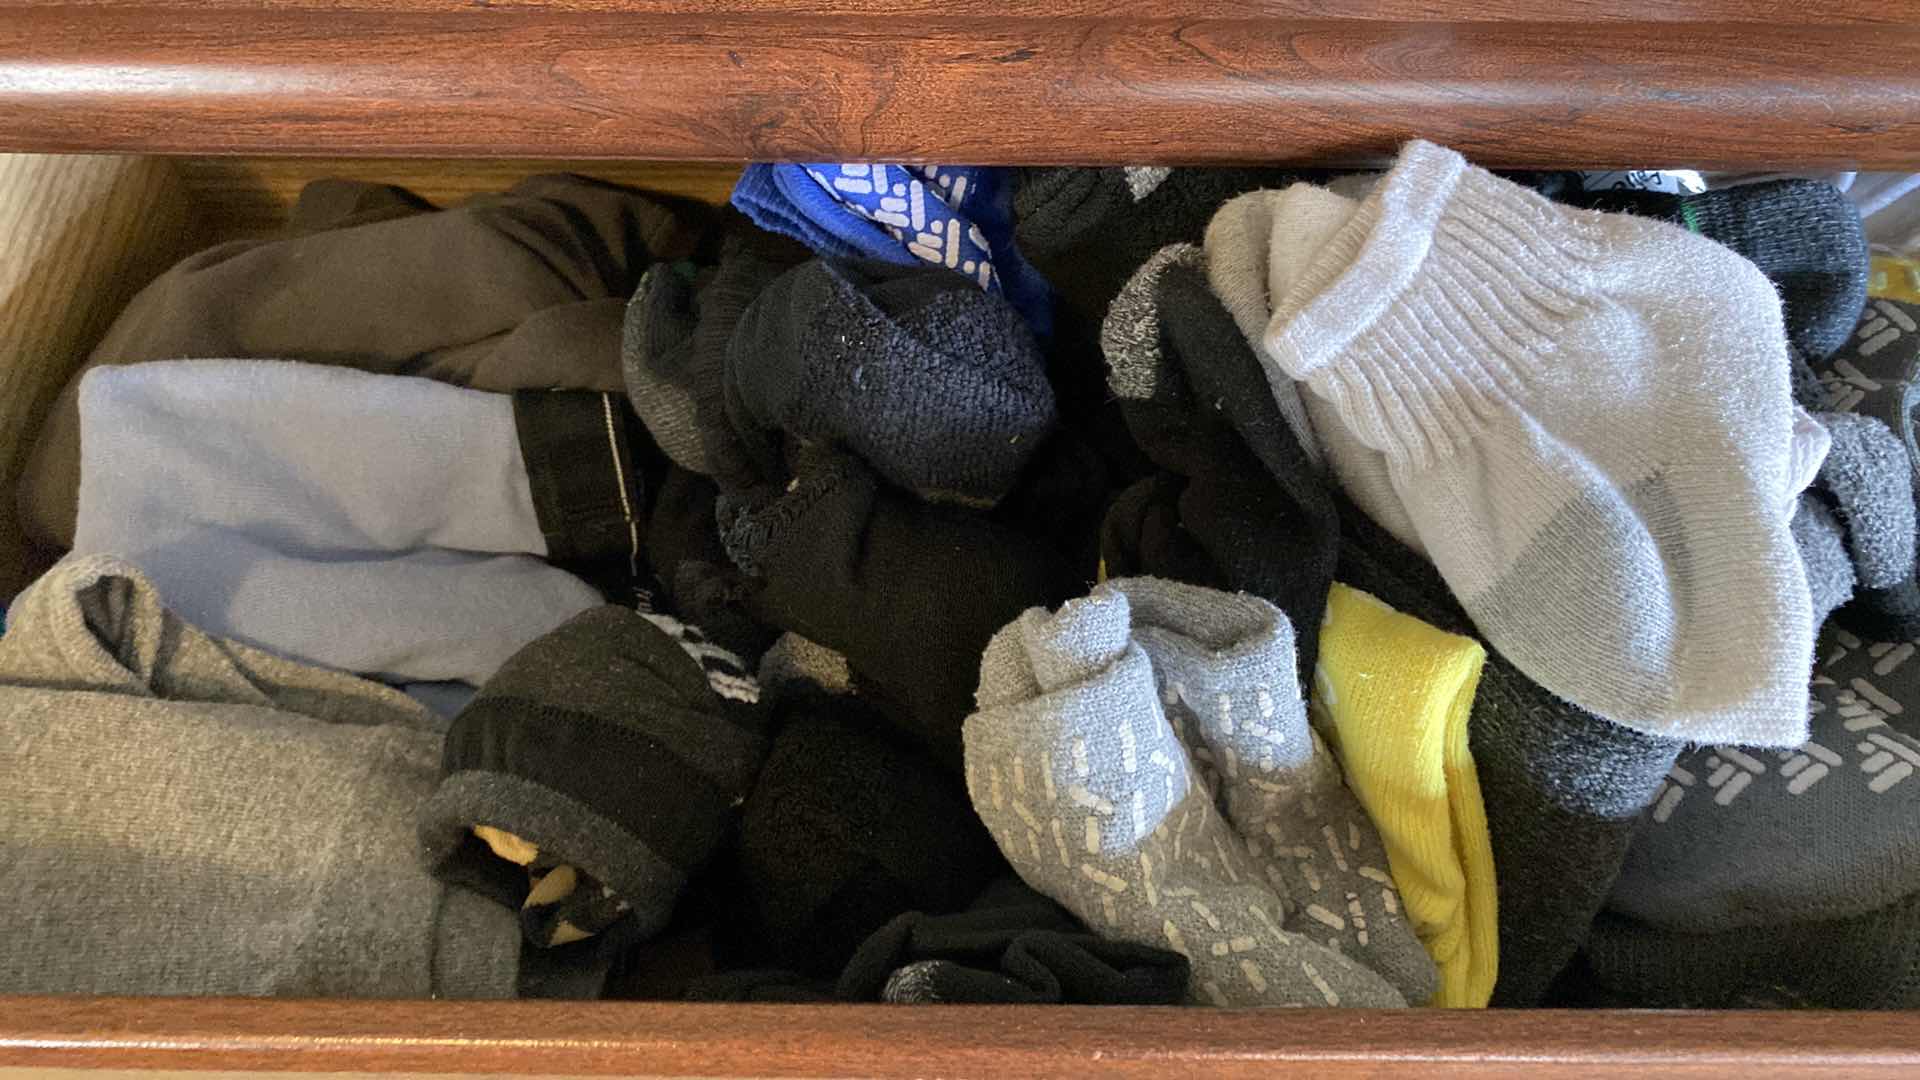 Photo 3 of CONTENTS 2 DRAWERS IN DRESSER MASTER BEDROOM MENS SOCKS AND UNDERWEAR